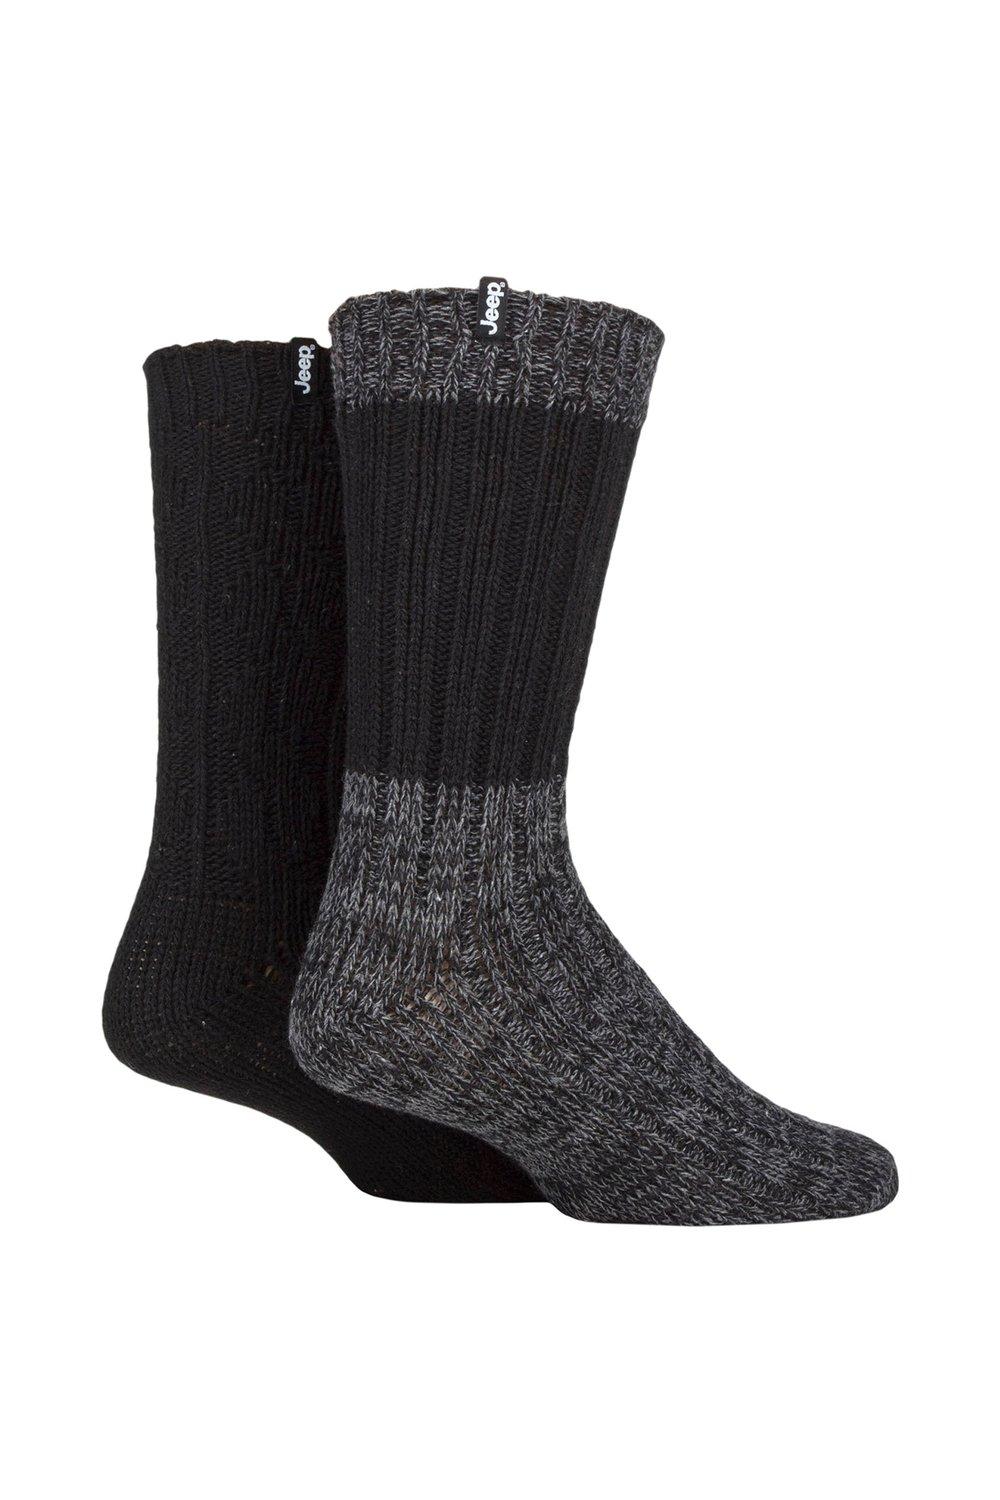 2 Pair Wool Blend Cable Knit Boot Socks